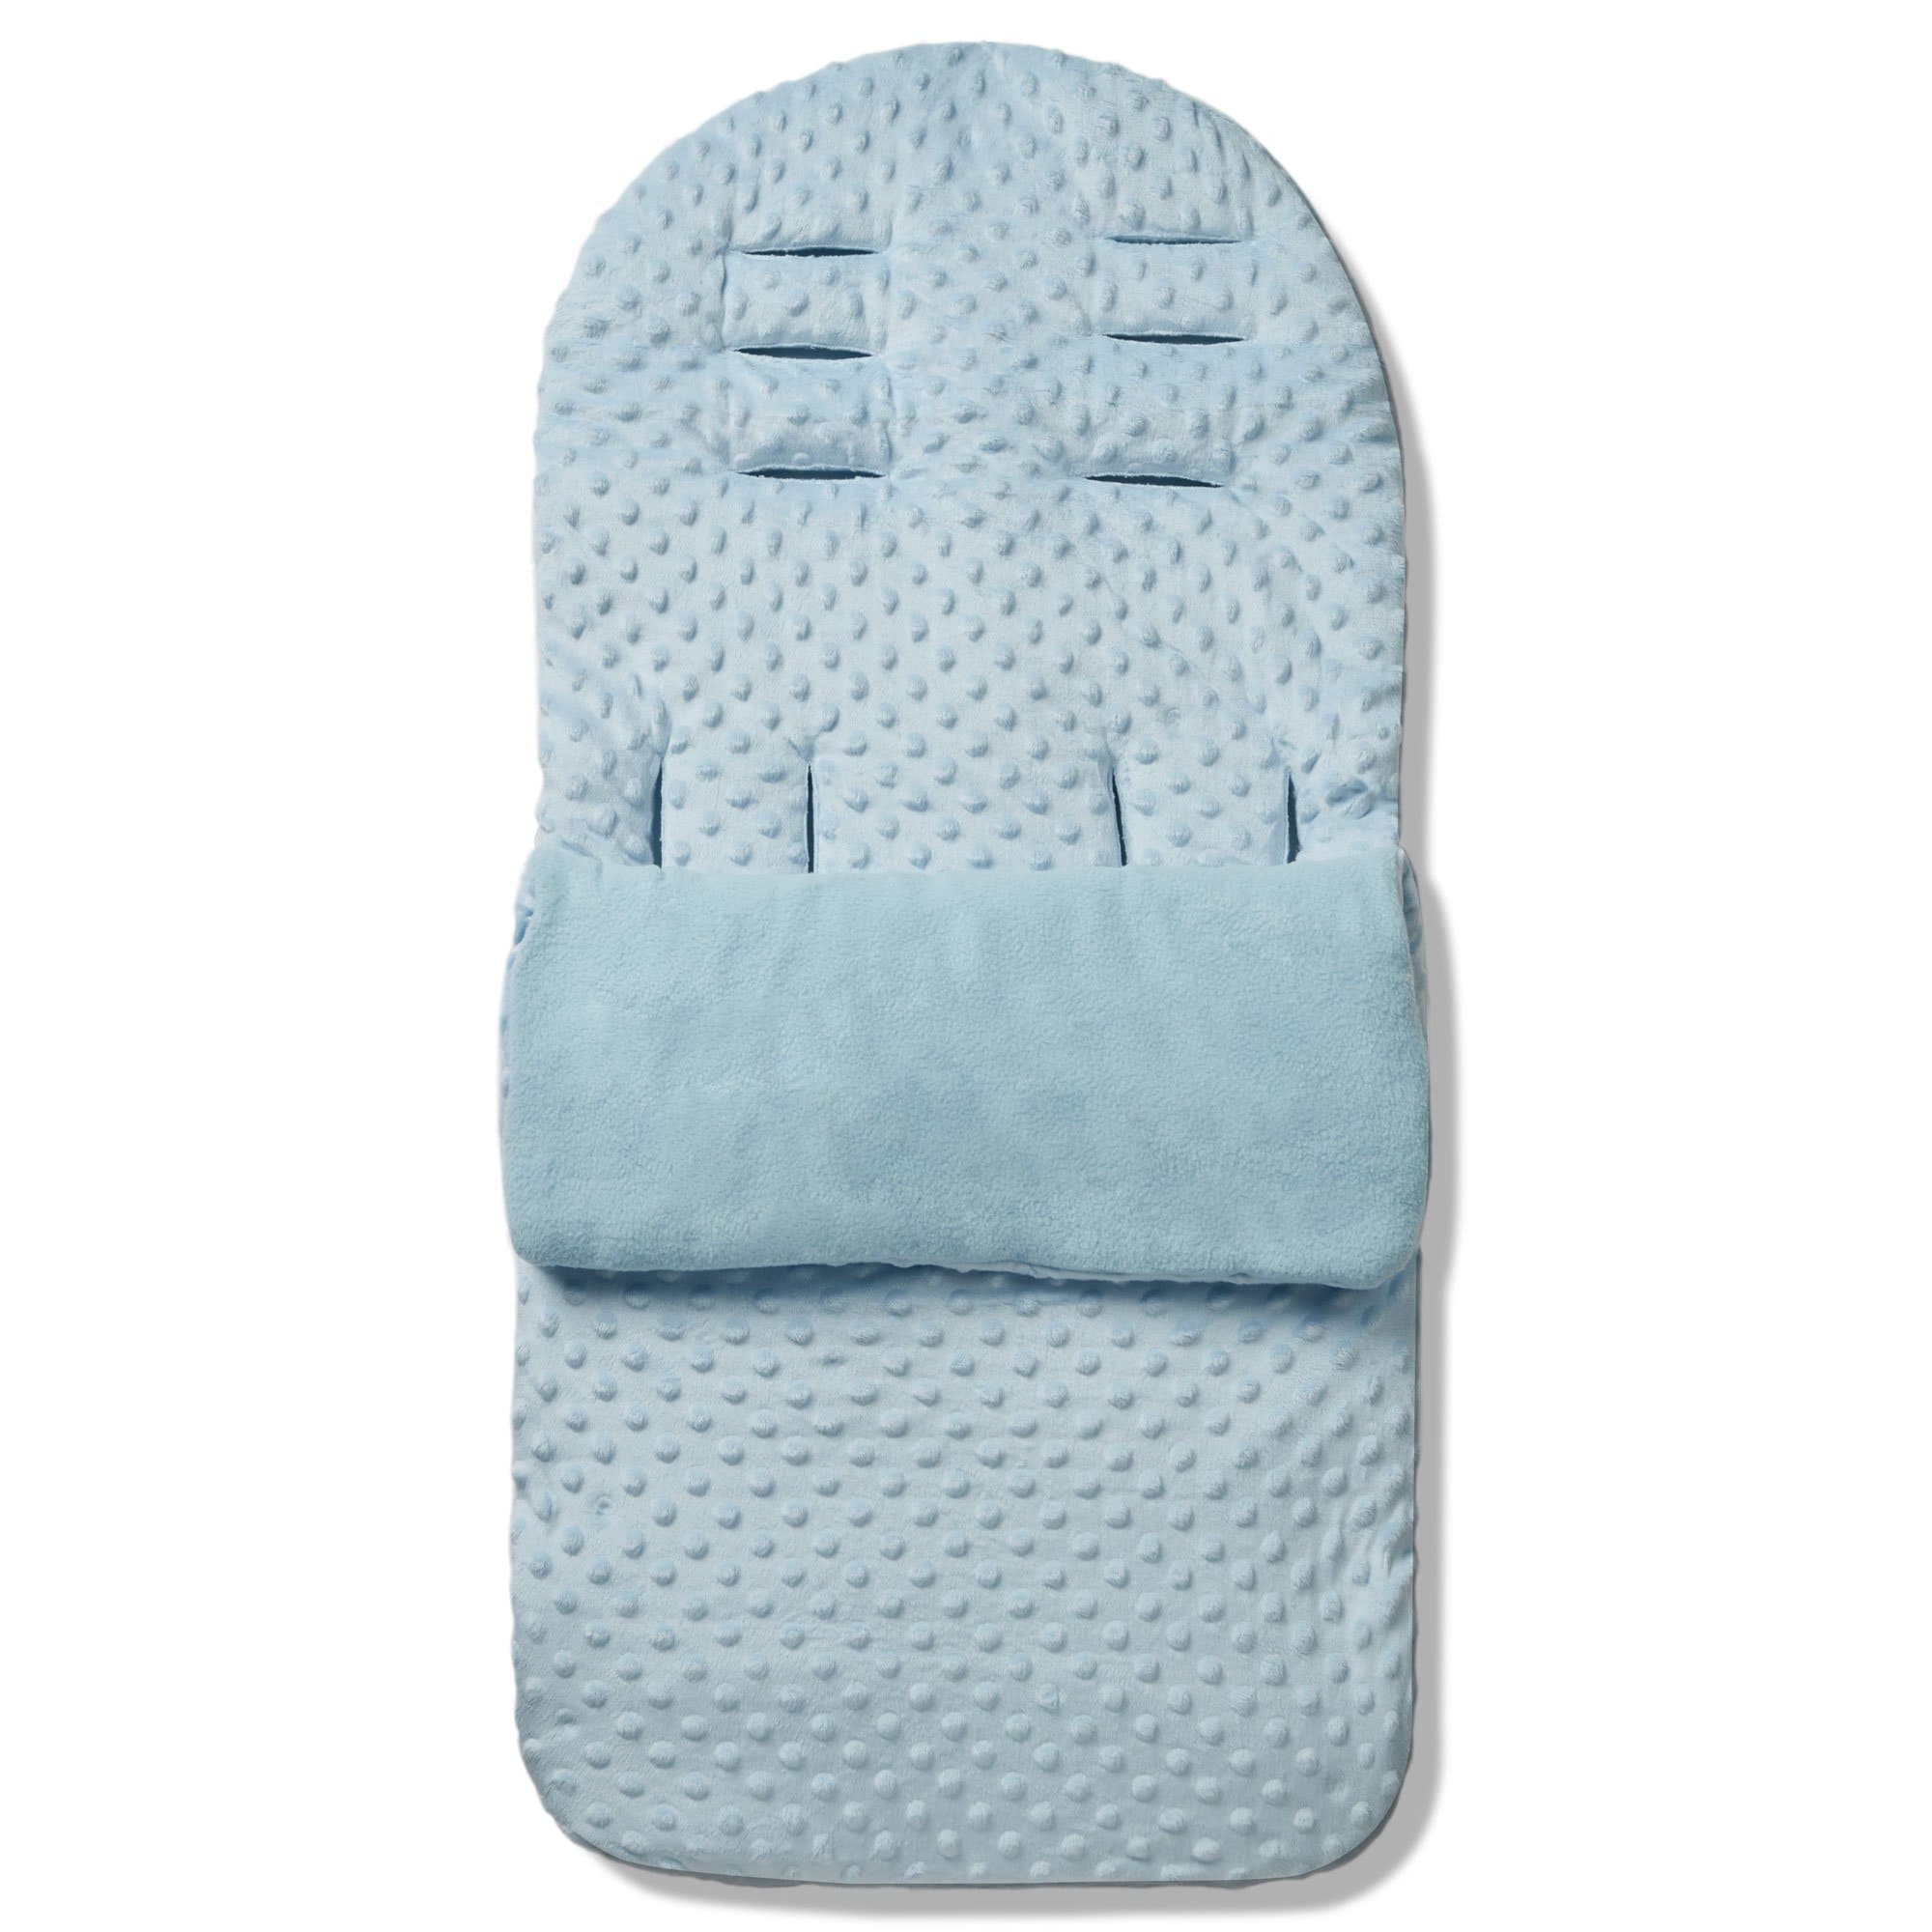 Dimple Footmuff / Cosy Toes Compatible with XTS - Blue / Fits All Models | For Your Little One